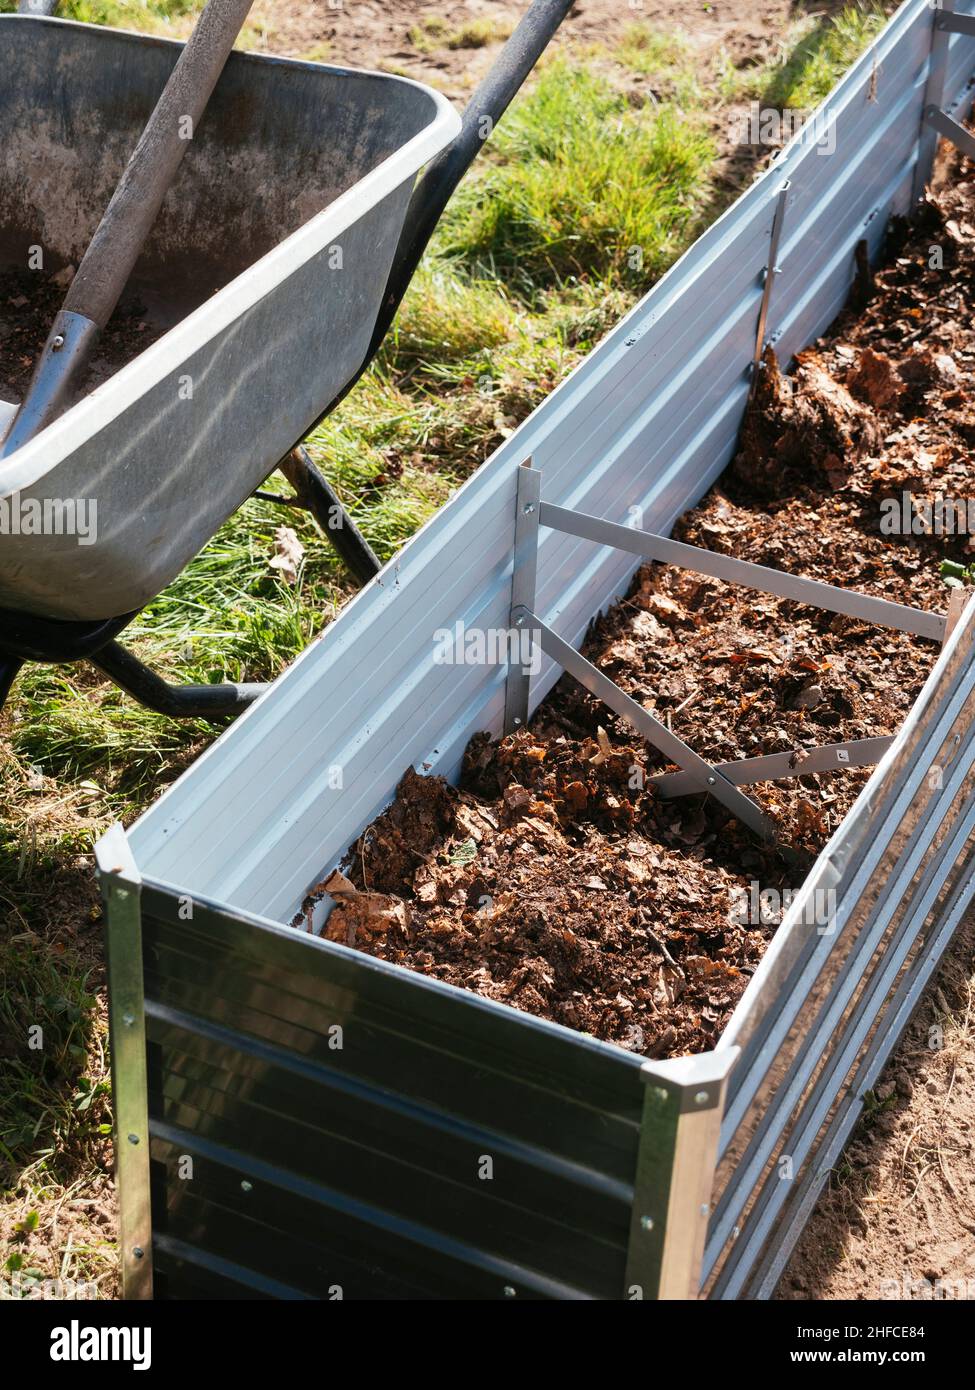 New raised bed being filled with compost and leaf mold. Stock Photo